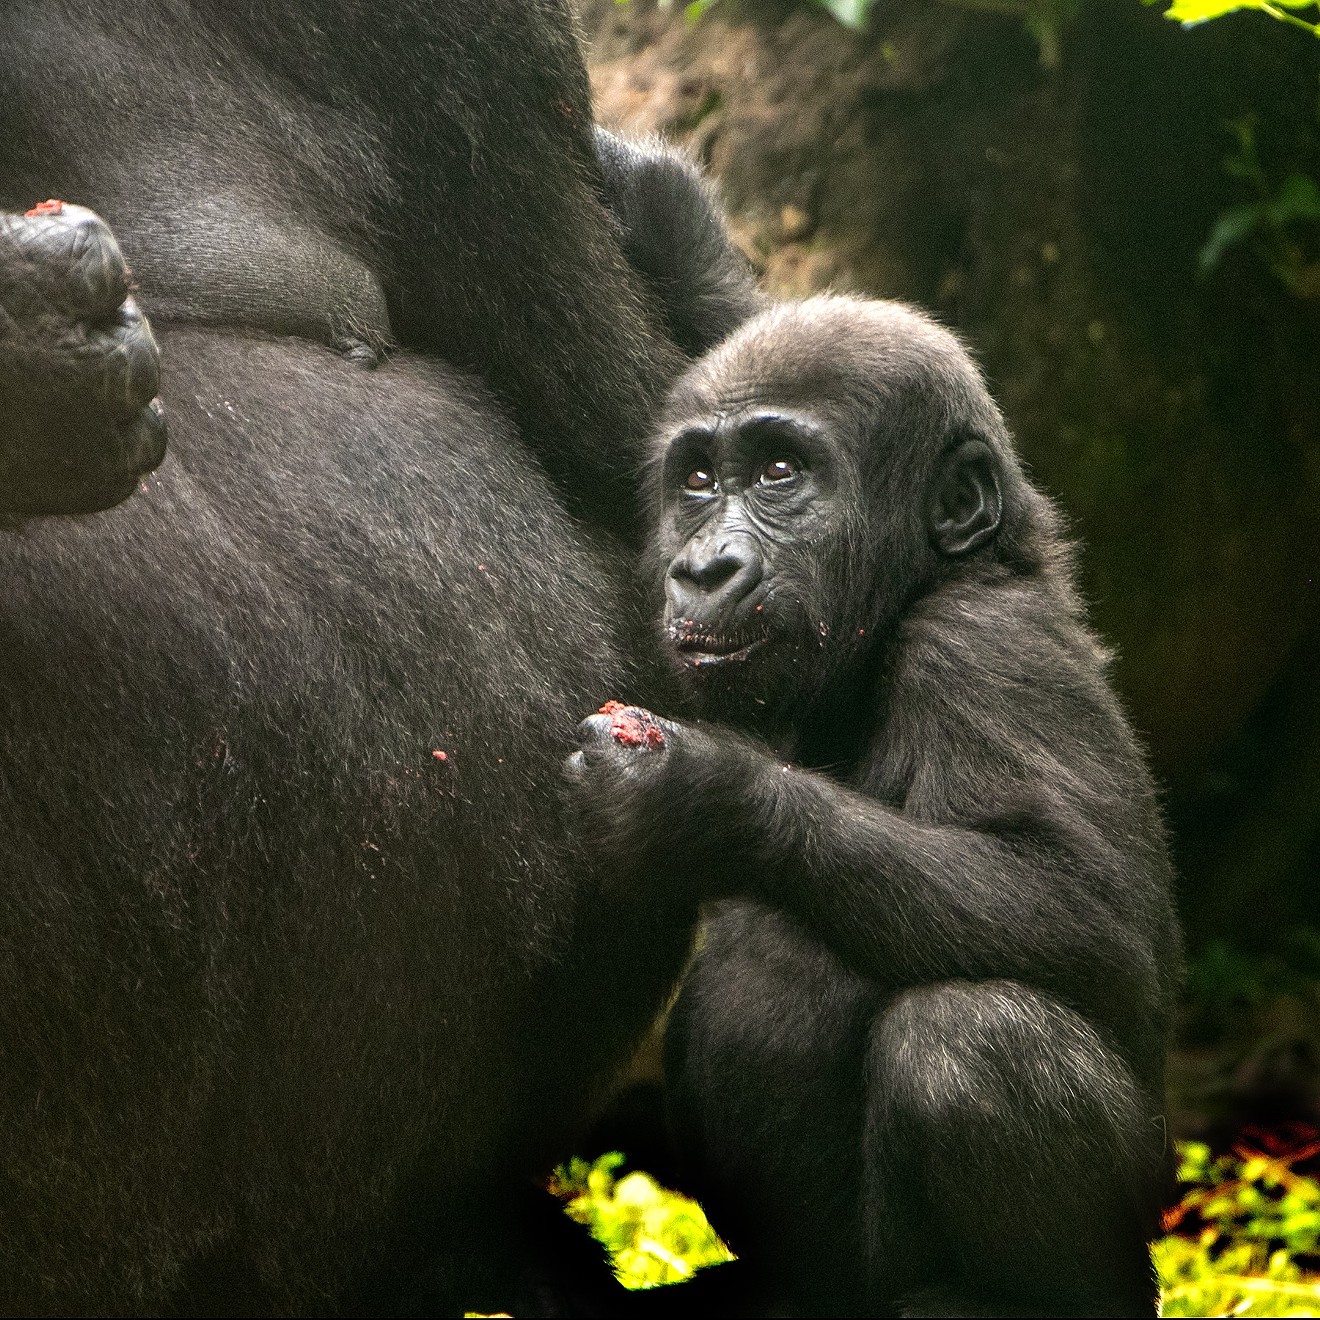 Baby Saambili, the first gorilla born in the Dallas Zoo in the last two decades, turned 1 this week.